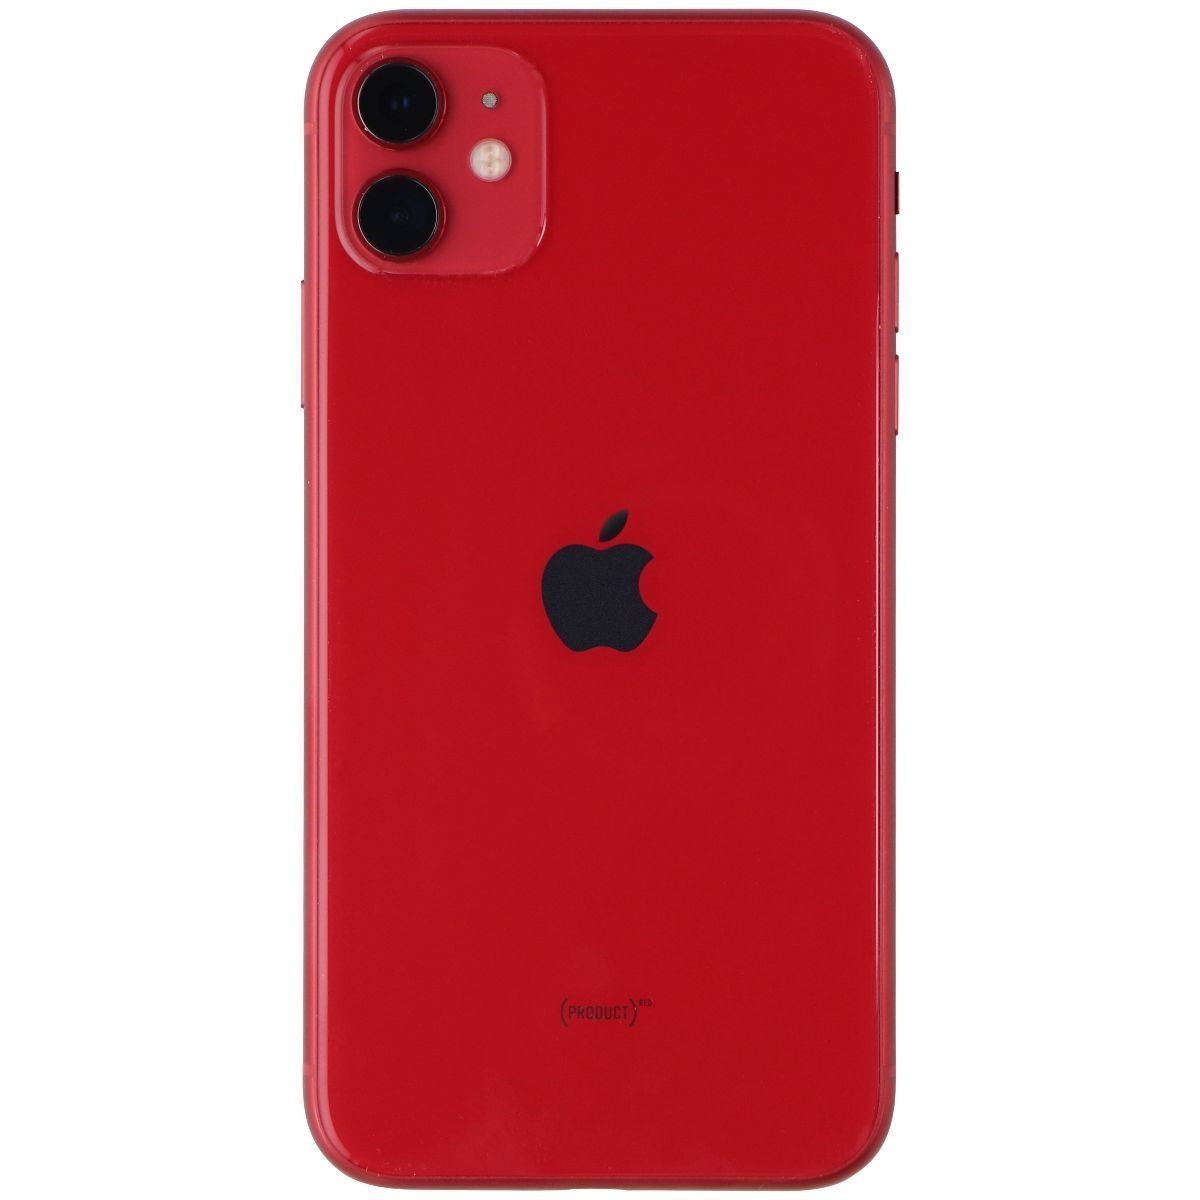 Apple iPhone 11 (6.1-inch) Smartphone (A2111) Unlocked - 128GB / Product (RED)